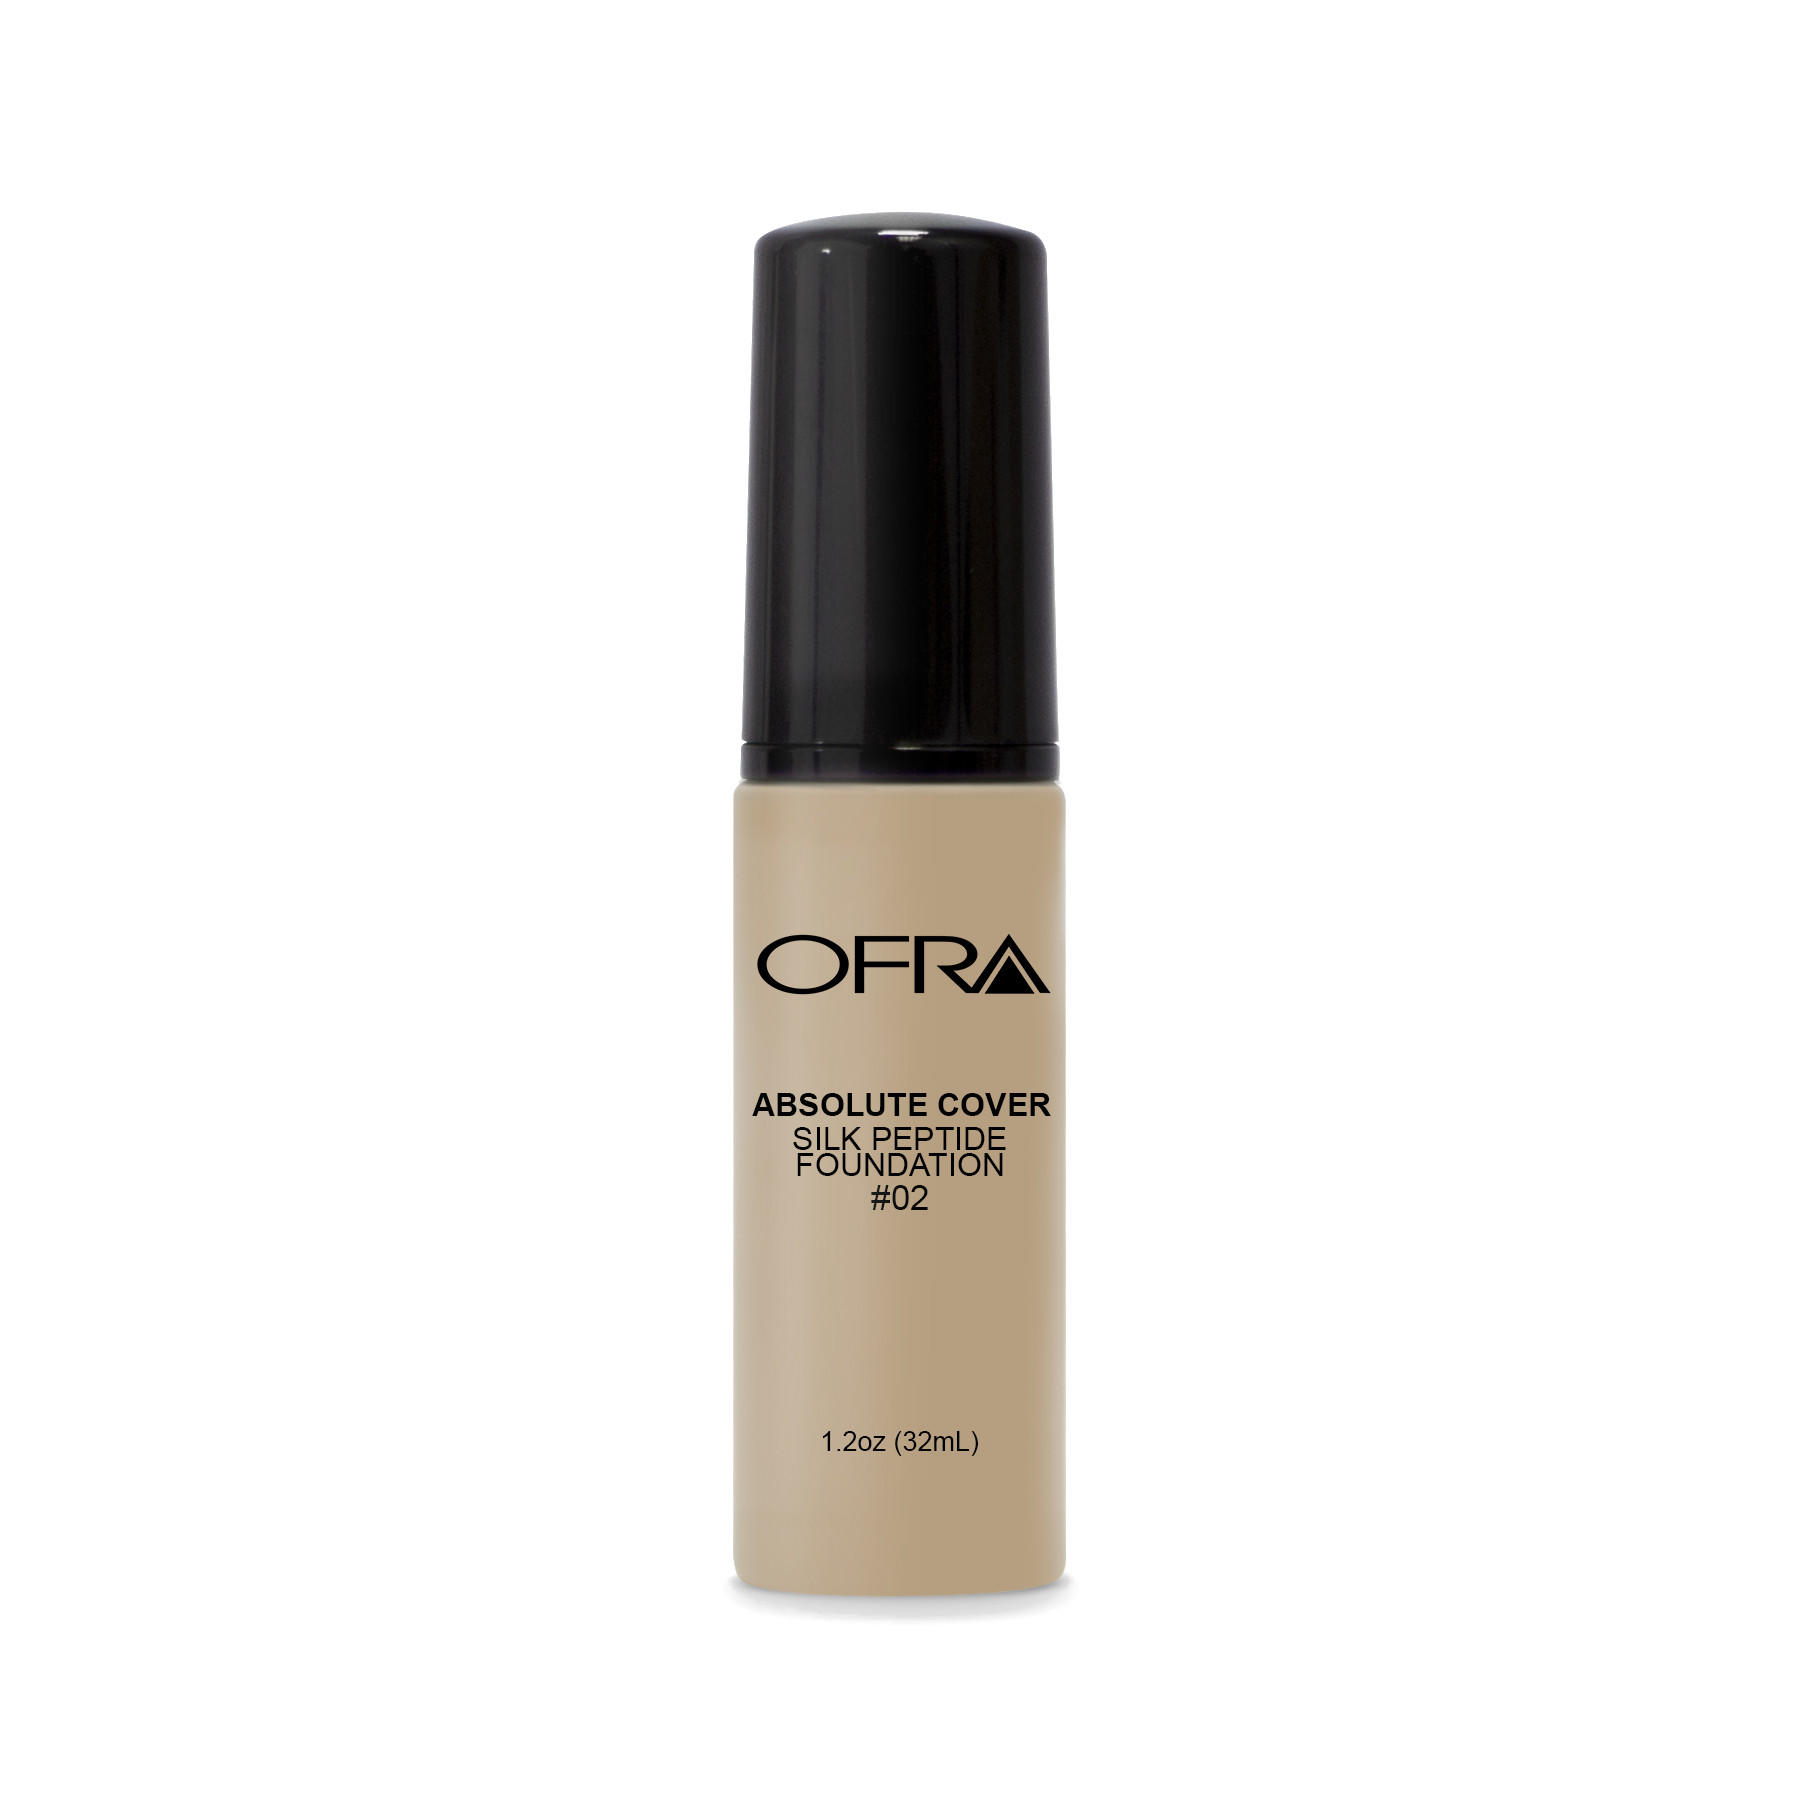 OFRA Absolute Cover Silk Peptide Foundation 02